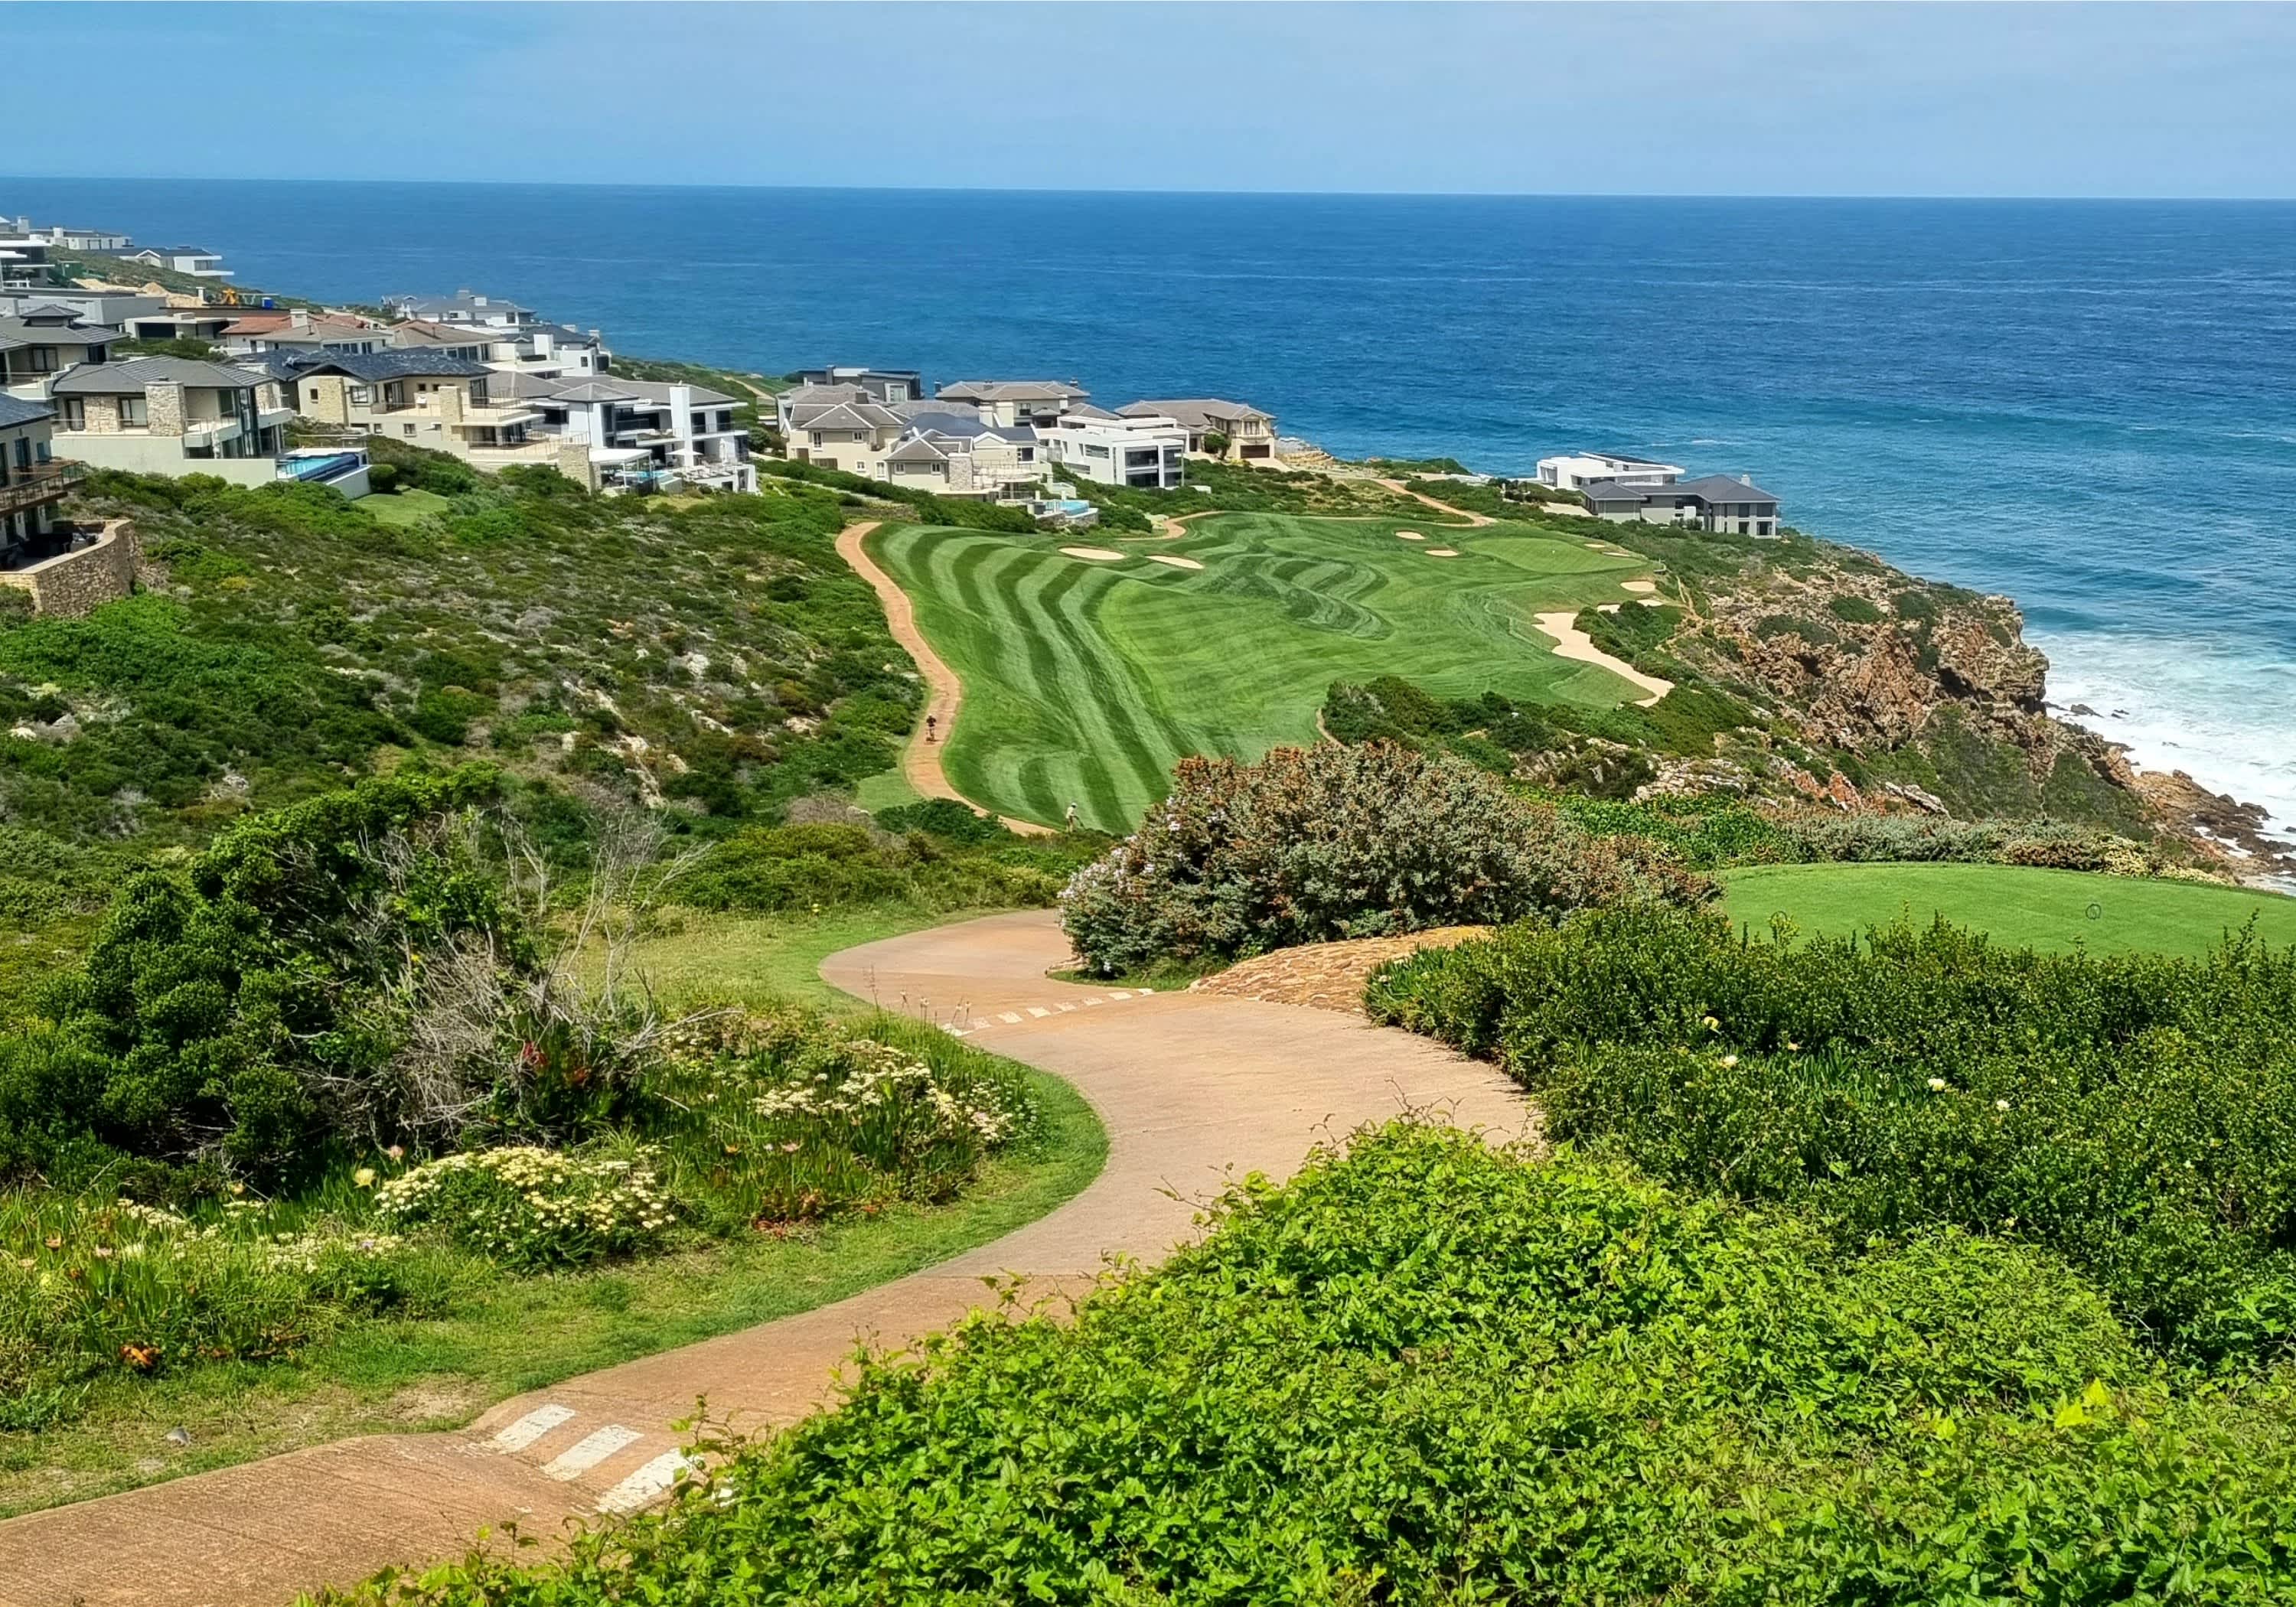 GOLF TOUR - 4 Ball + Carts at PINNACLE POINT GOLF COURSE + 2 Night Stay for 4 at HARTENBOS RIVER LODGE in Mossel Bay!